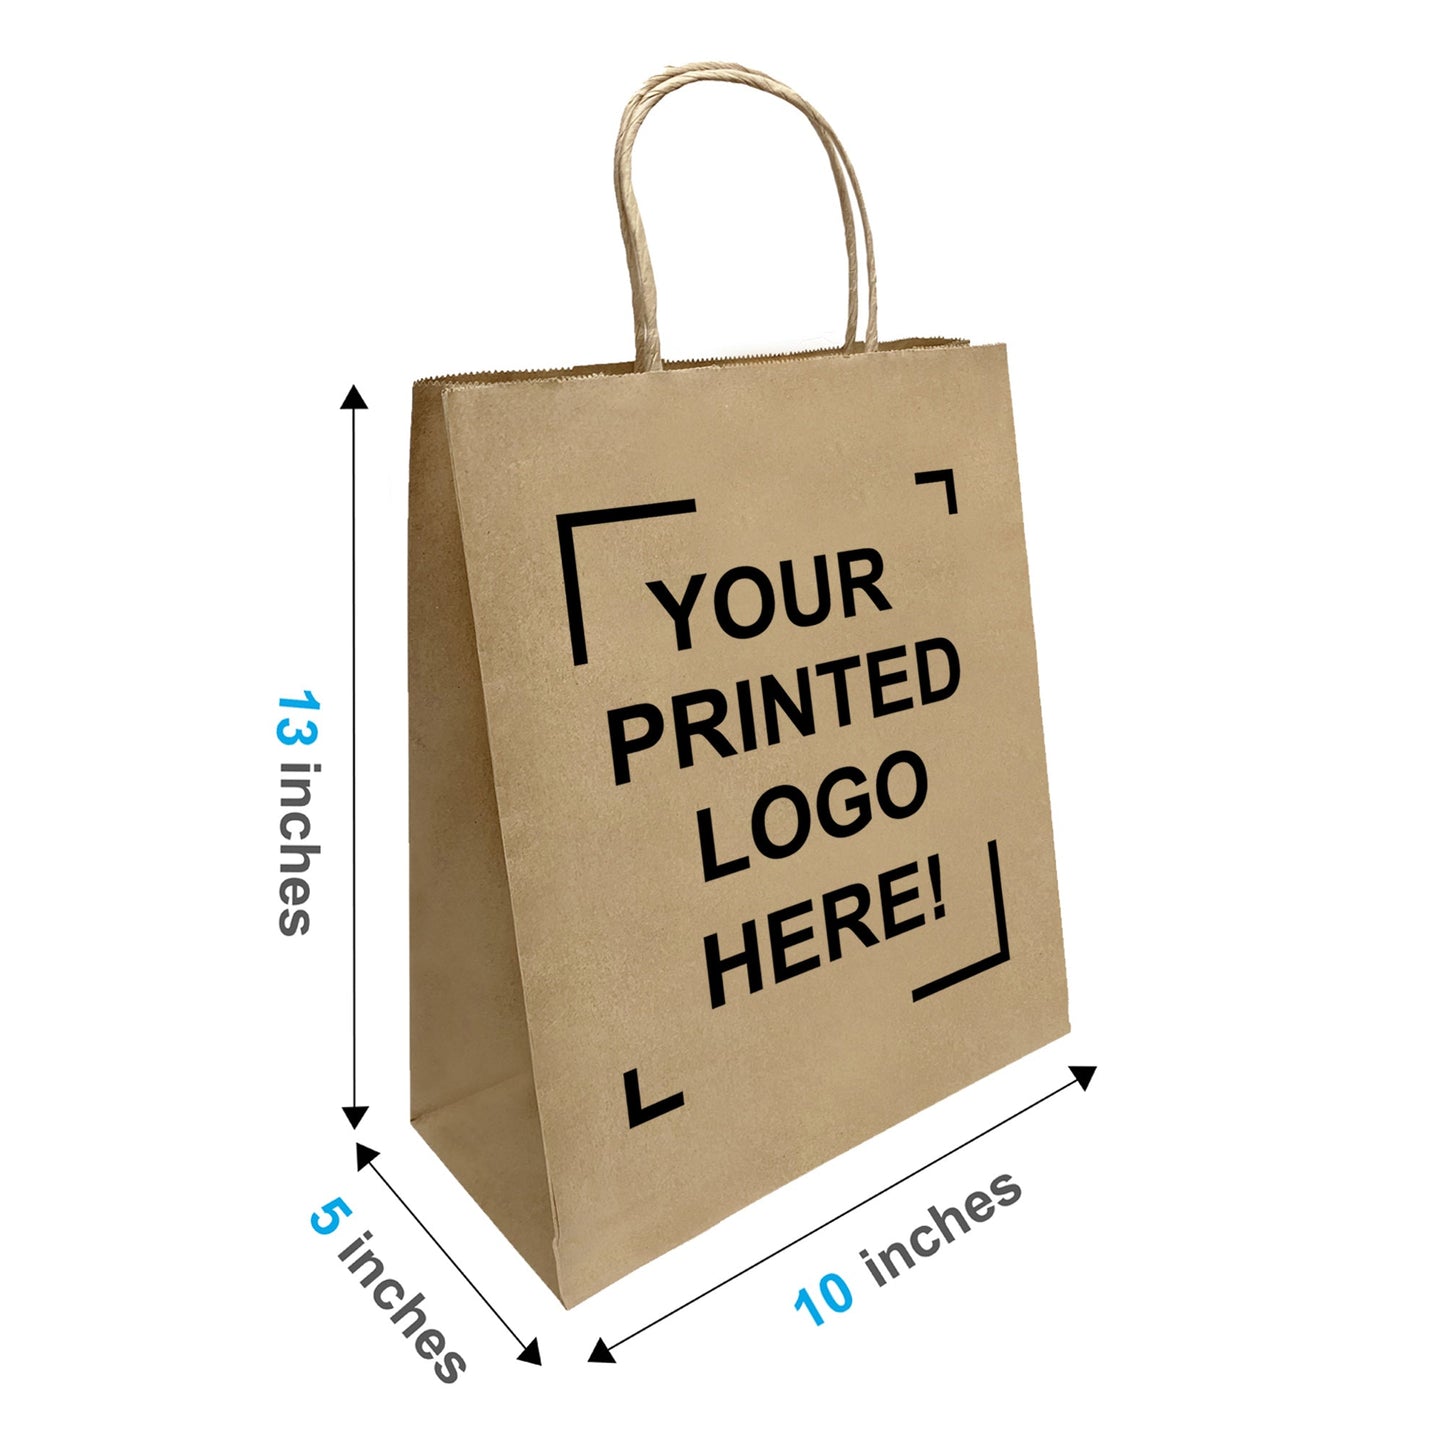 250 Pcs, Debbie, 10x5x13 inches, Kraft Paper Bags, with Twisted Handle, Full Color Custom Print